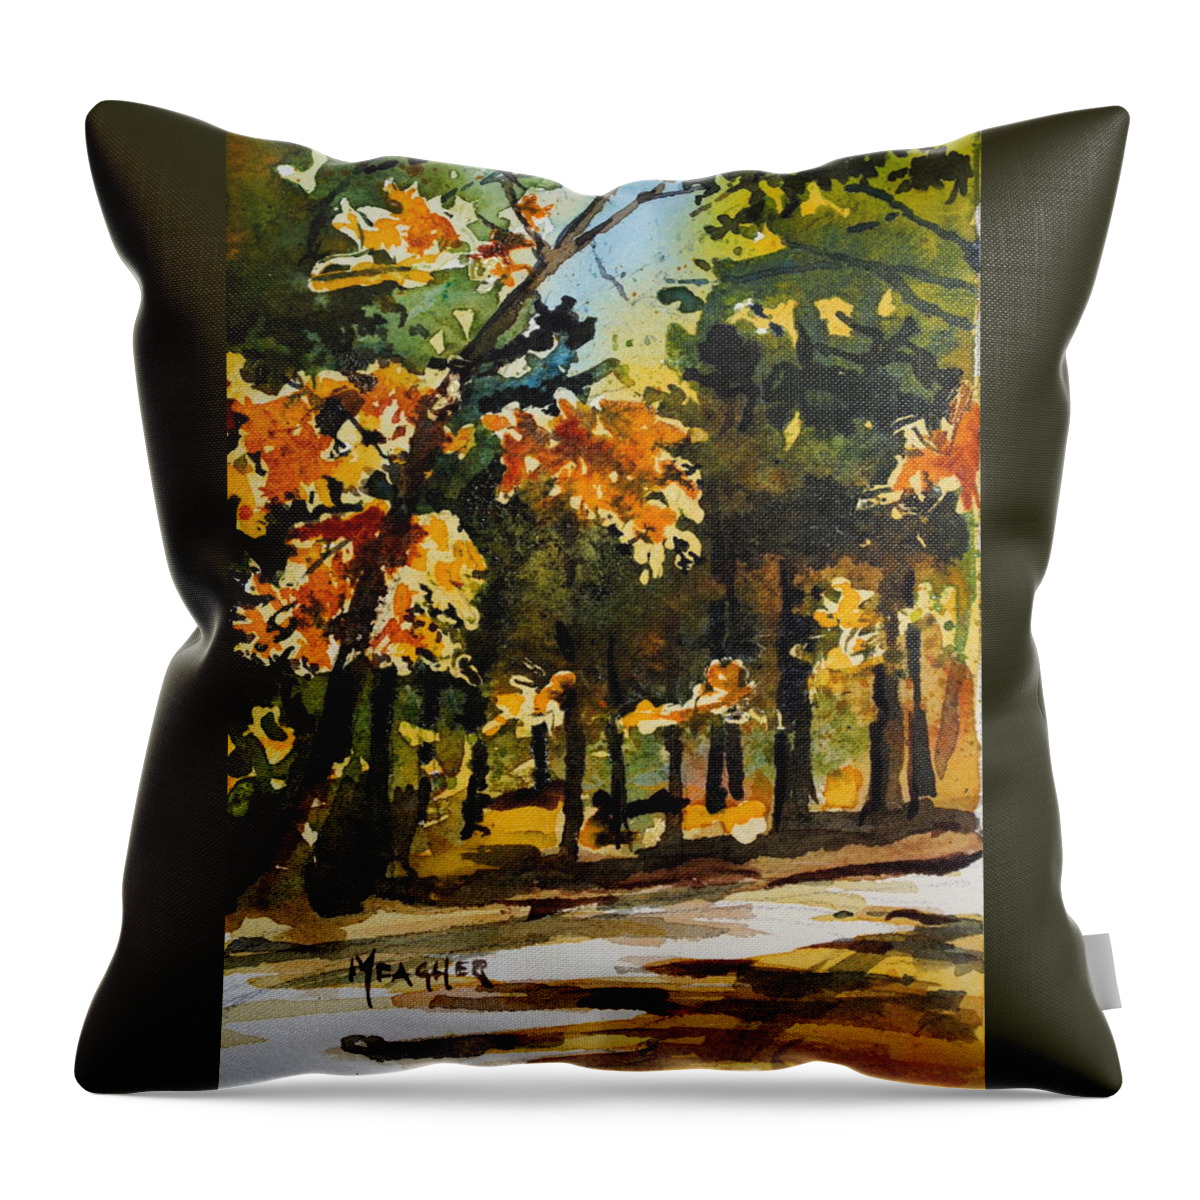 Natchez Trace Throw Pillow featuring the painting Autumn On The Natchez Trace by Spencer Meagher